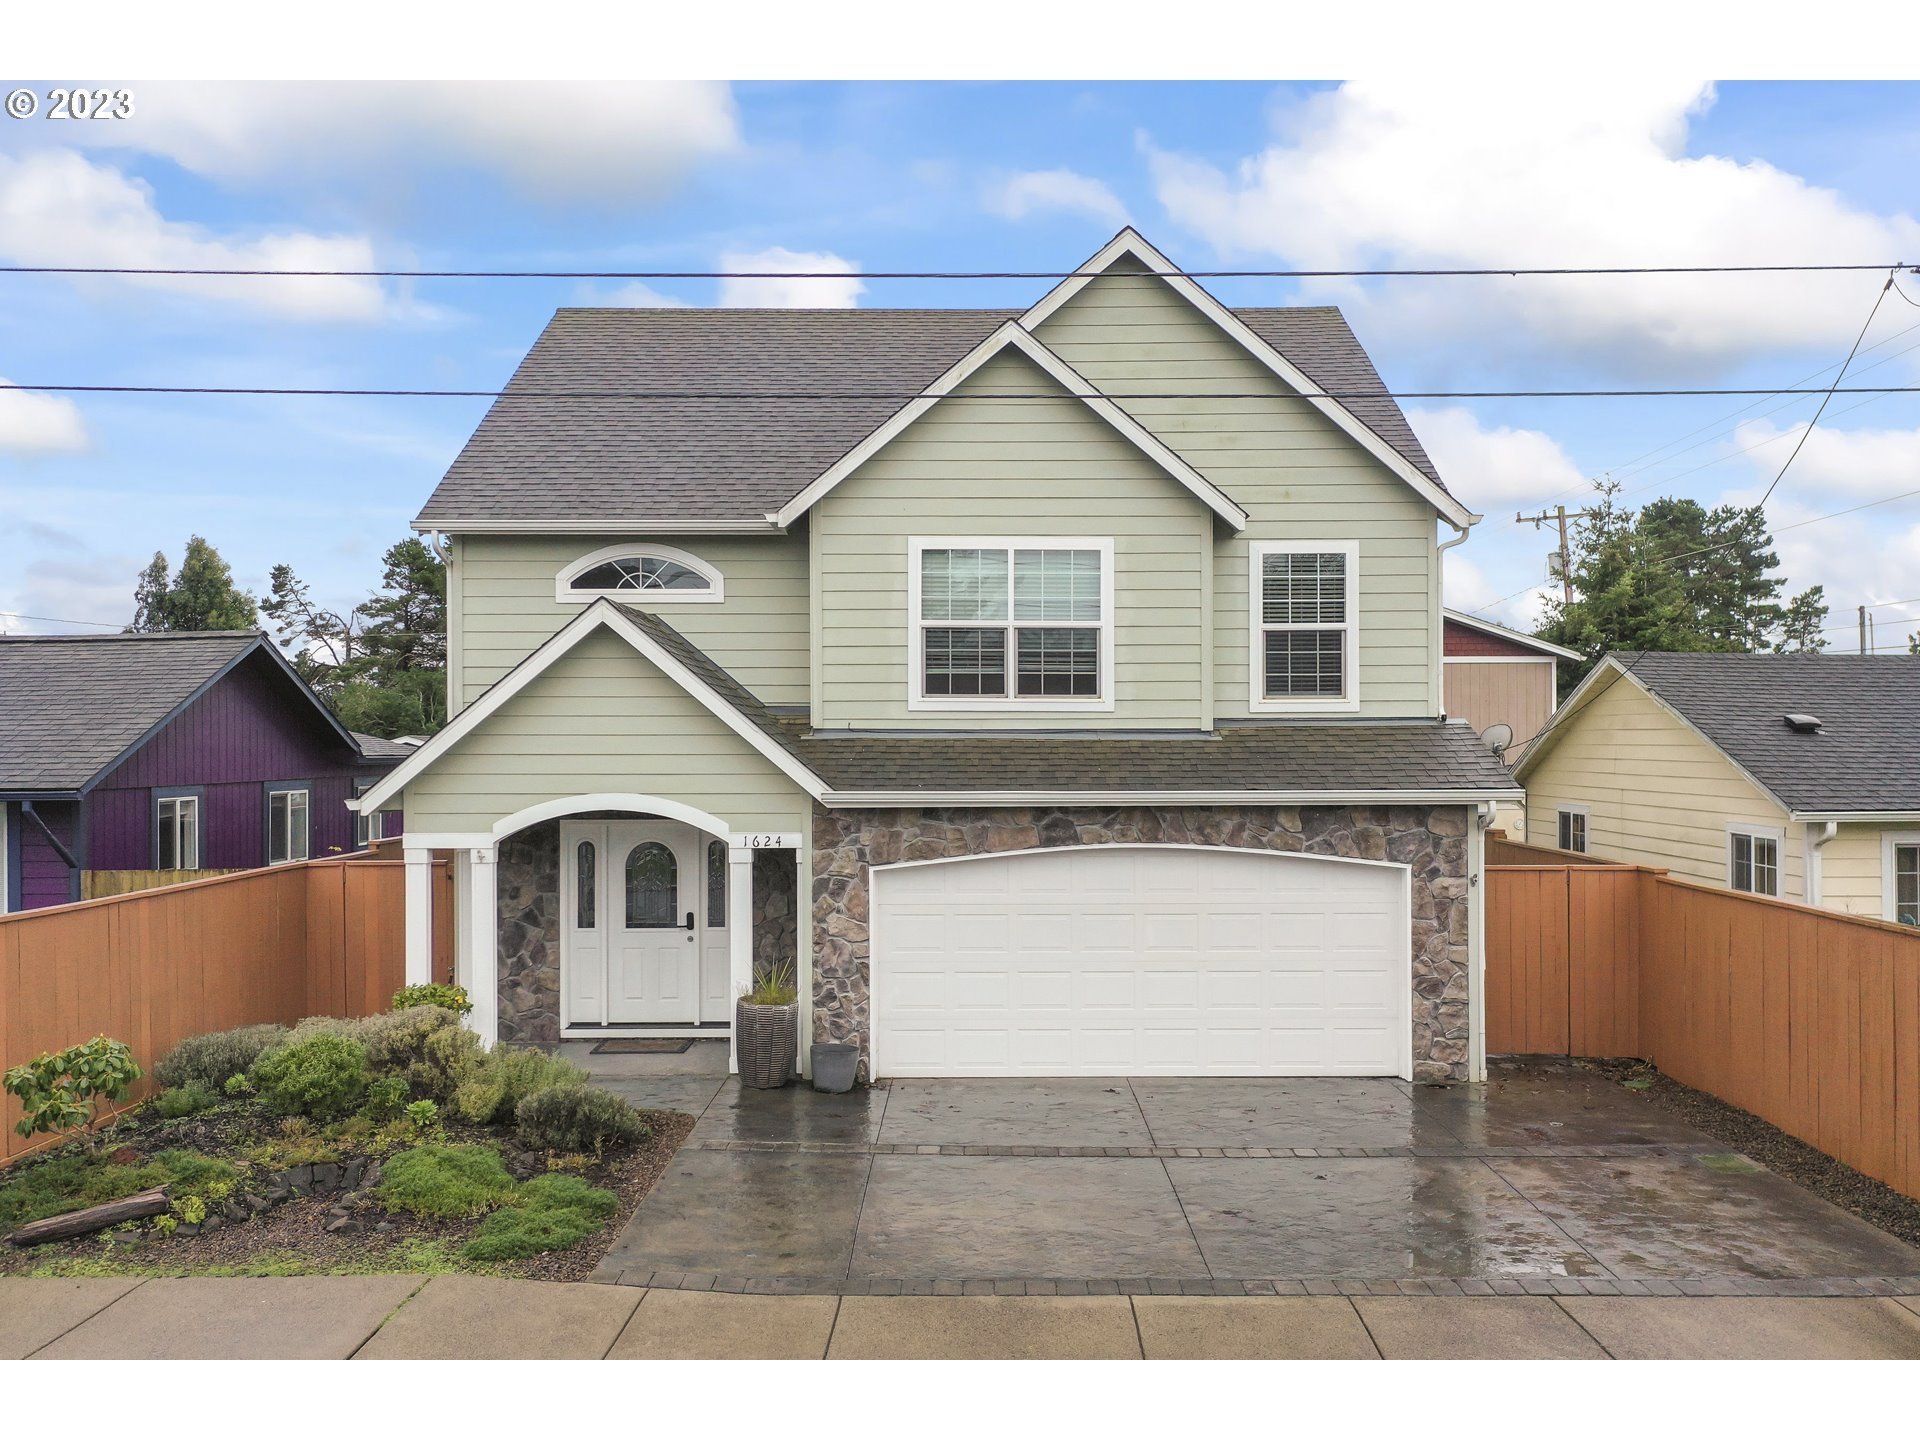 1624 36TH ST, Florence, OR 97439